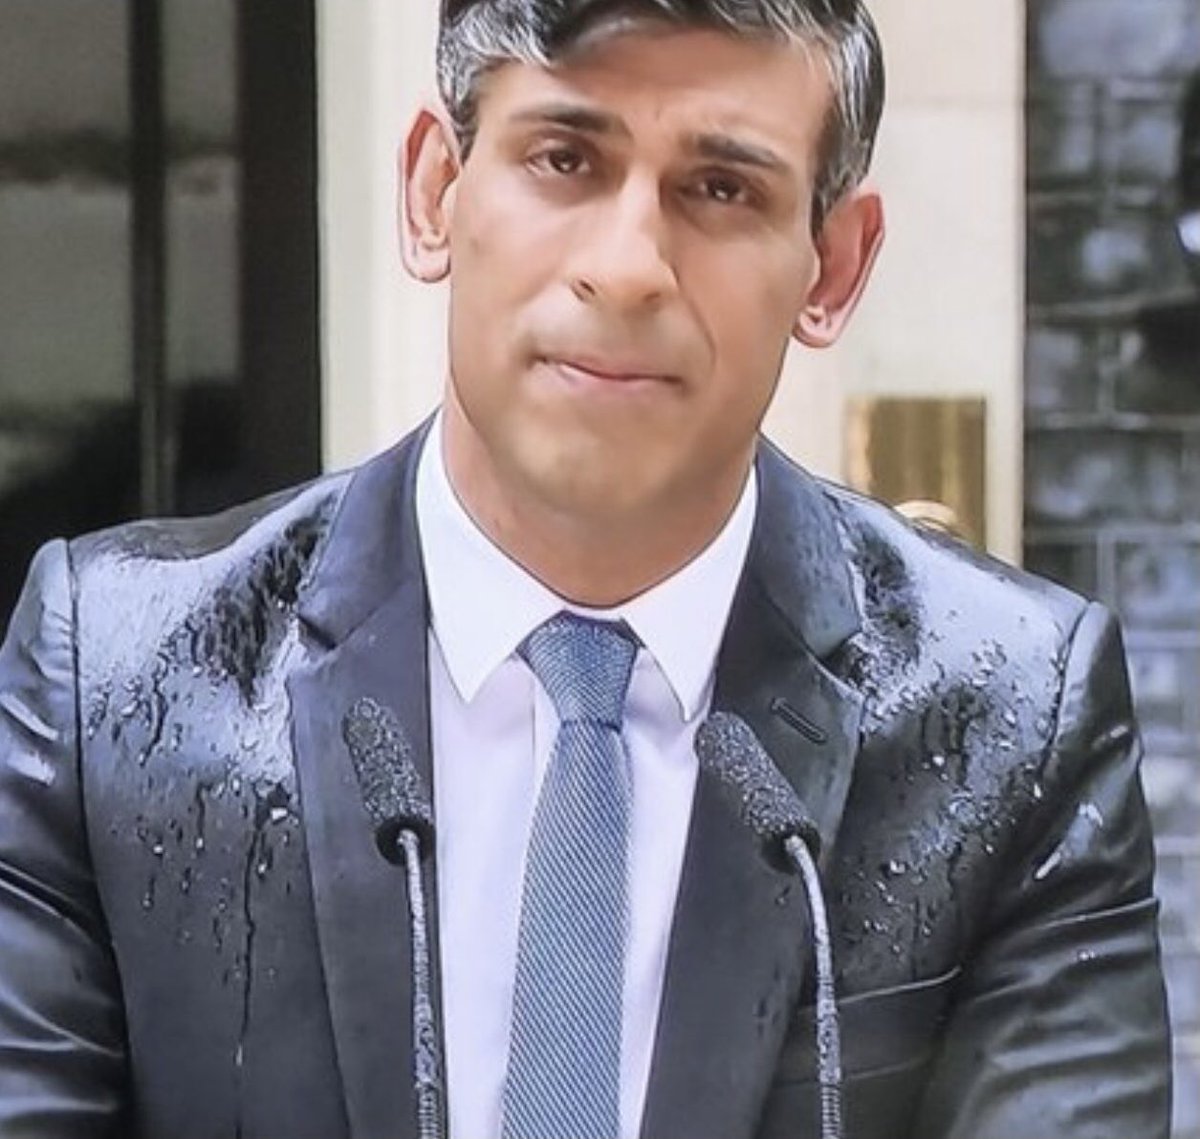 The Tories Spent £2.6m on a Downing Street press briefing room Rishi Sunak then called a snap General Election, in the rain, being drowned out by protesters... If this does not sum up the incompetence of the Conservatives, I dont know what does 42 days and counting Rishi...